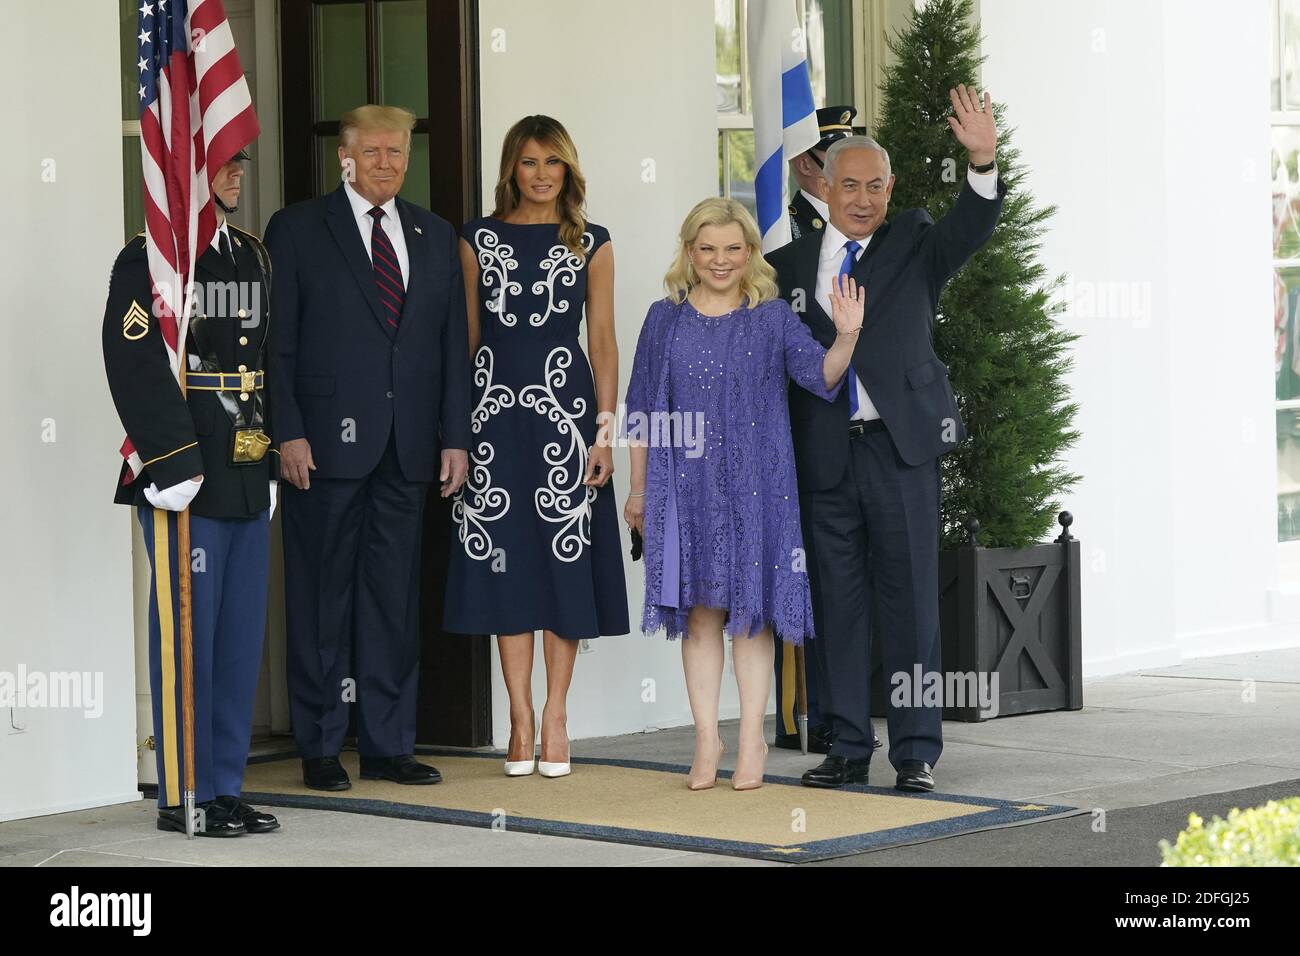 United States President Donald J. Trump and first lady Melania Trump  welcomes Prime Minister Benjamin Netanyahu of Israel, and his wife Sara, to  the White House in Washington, DC, USA, on Tuesday,